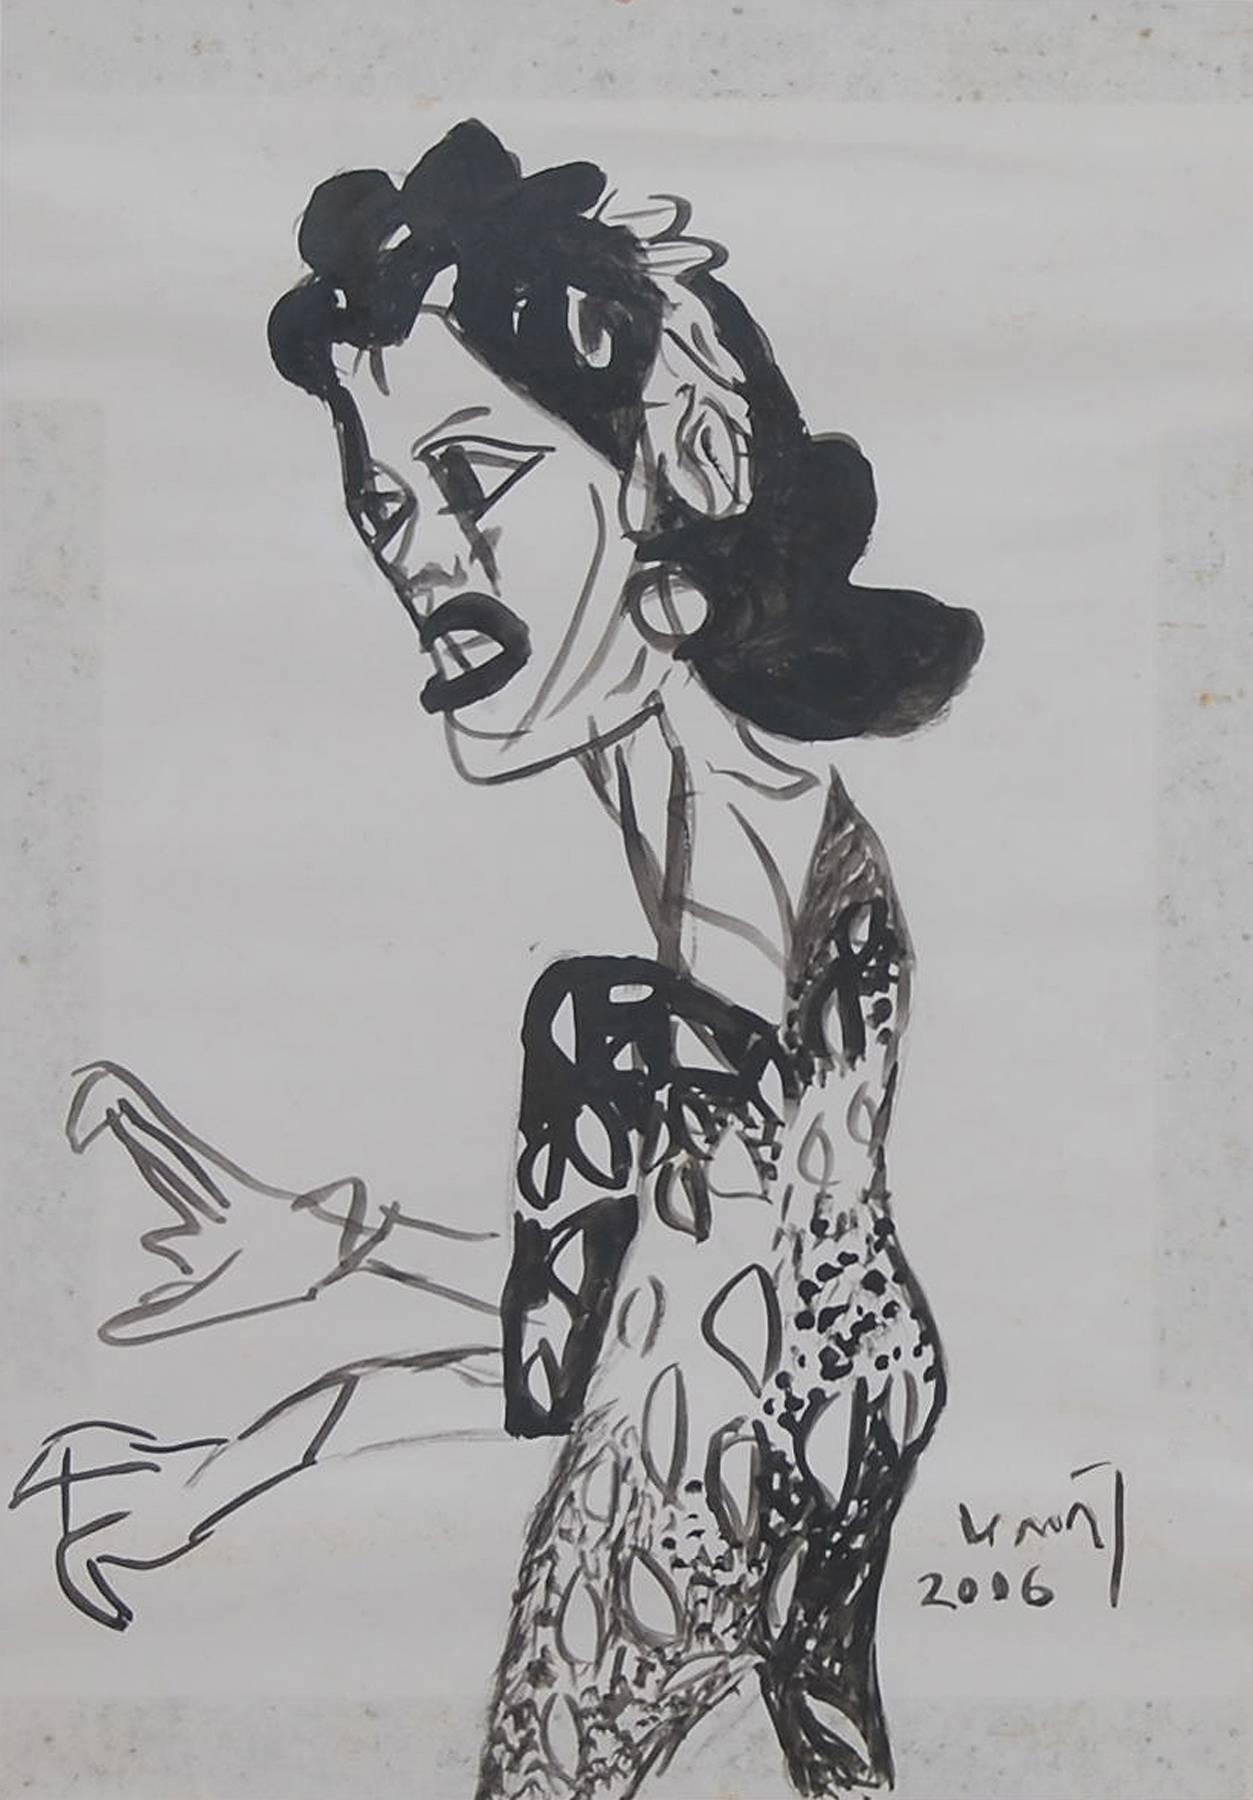 Girl executed in ink on paper by Indian Artist Padma Bhushan K. G. Subramanyan - Painting by K.G. Subramanyan